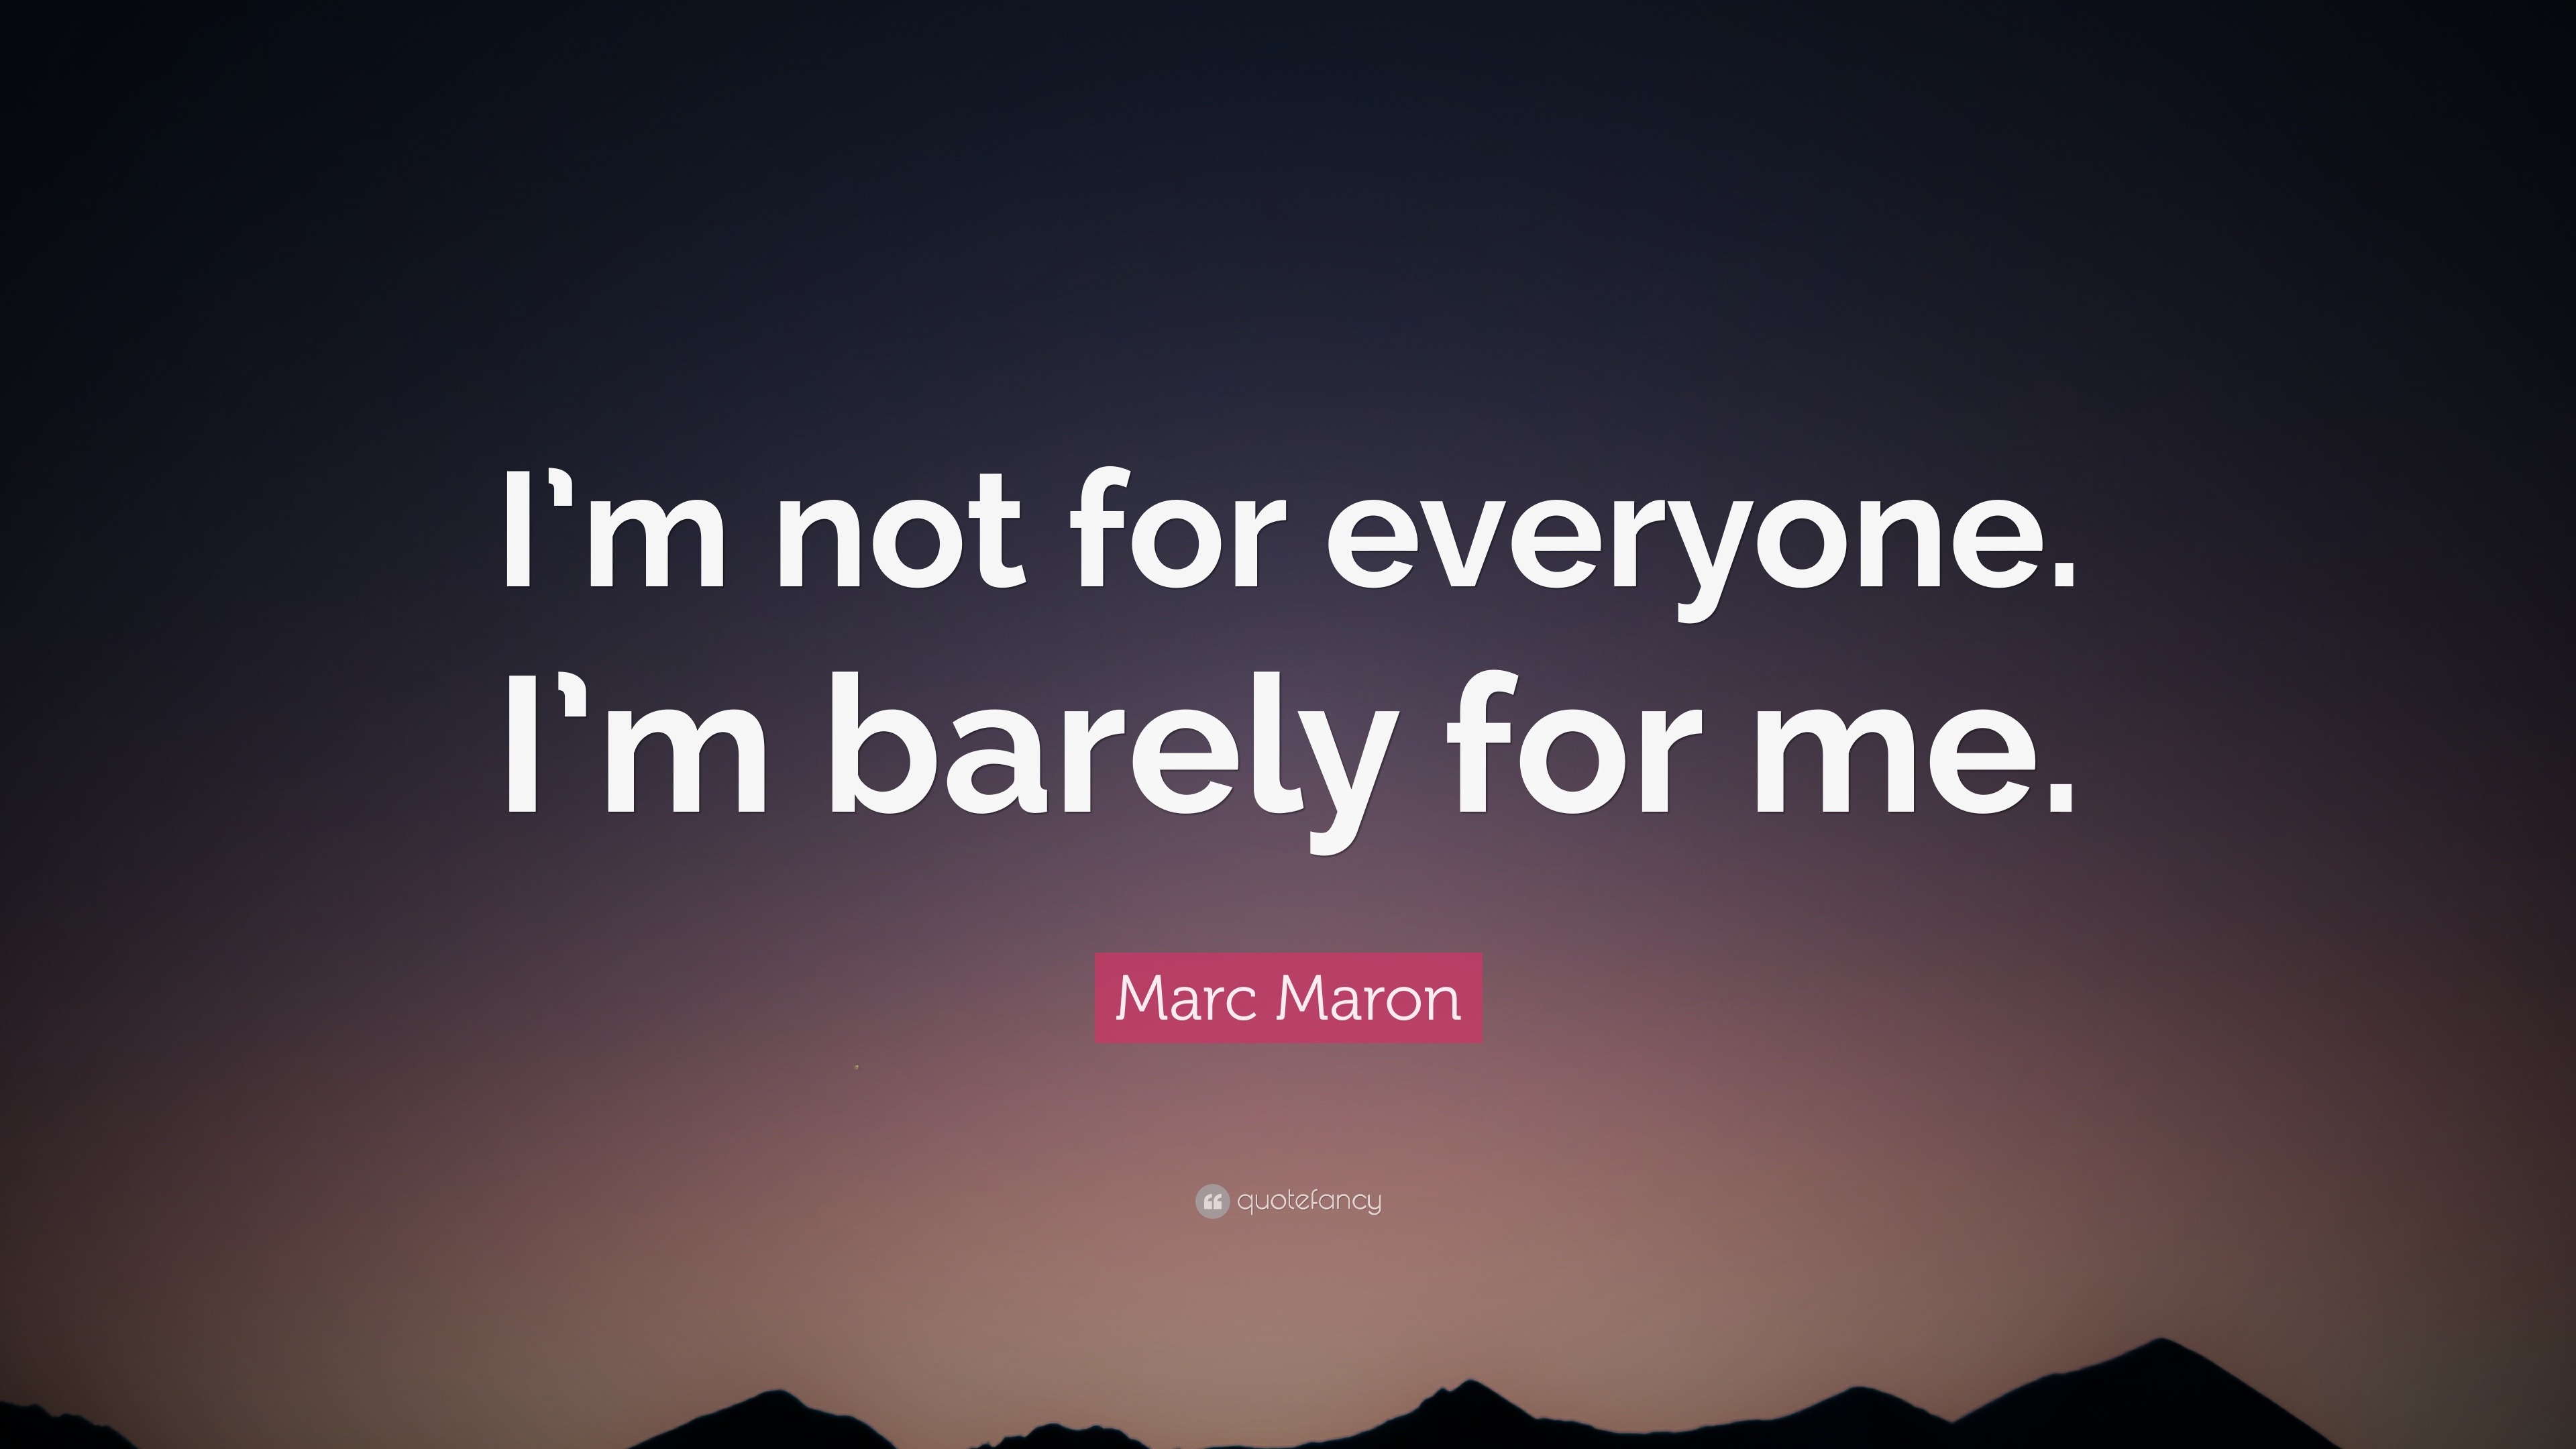 Marc Maron Quote: "I'm not for everyone. I'm barely for me."